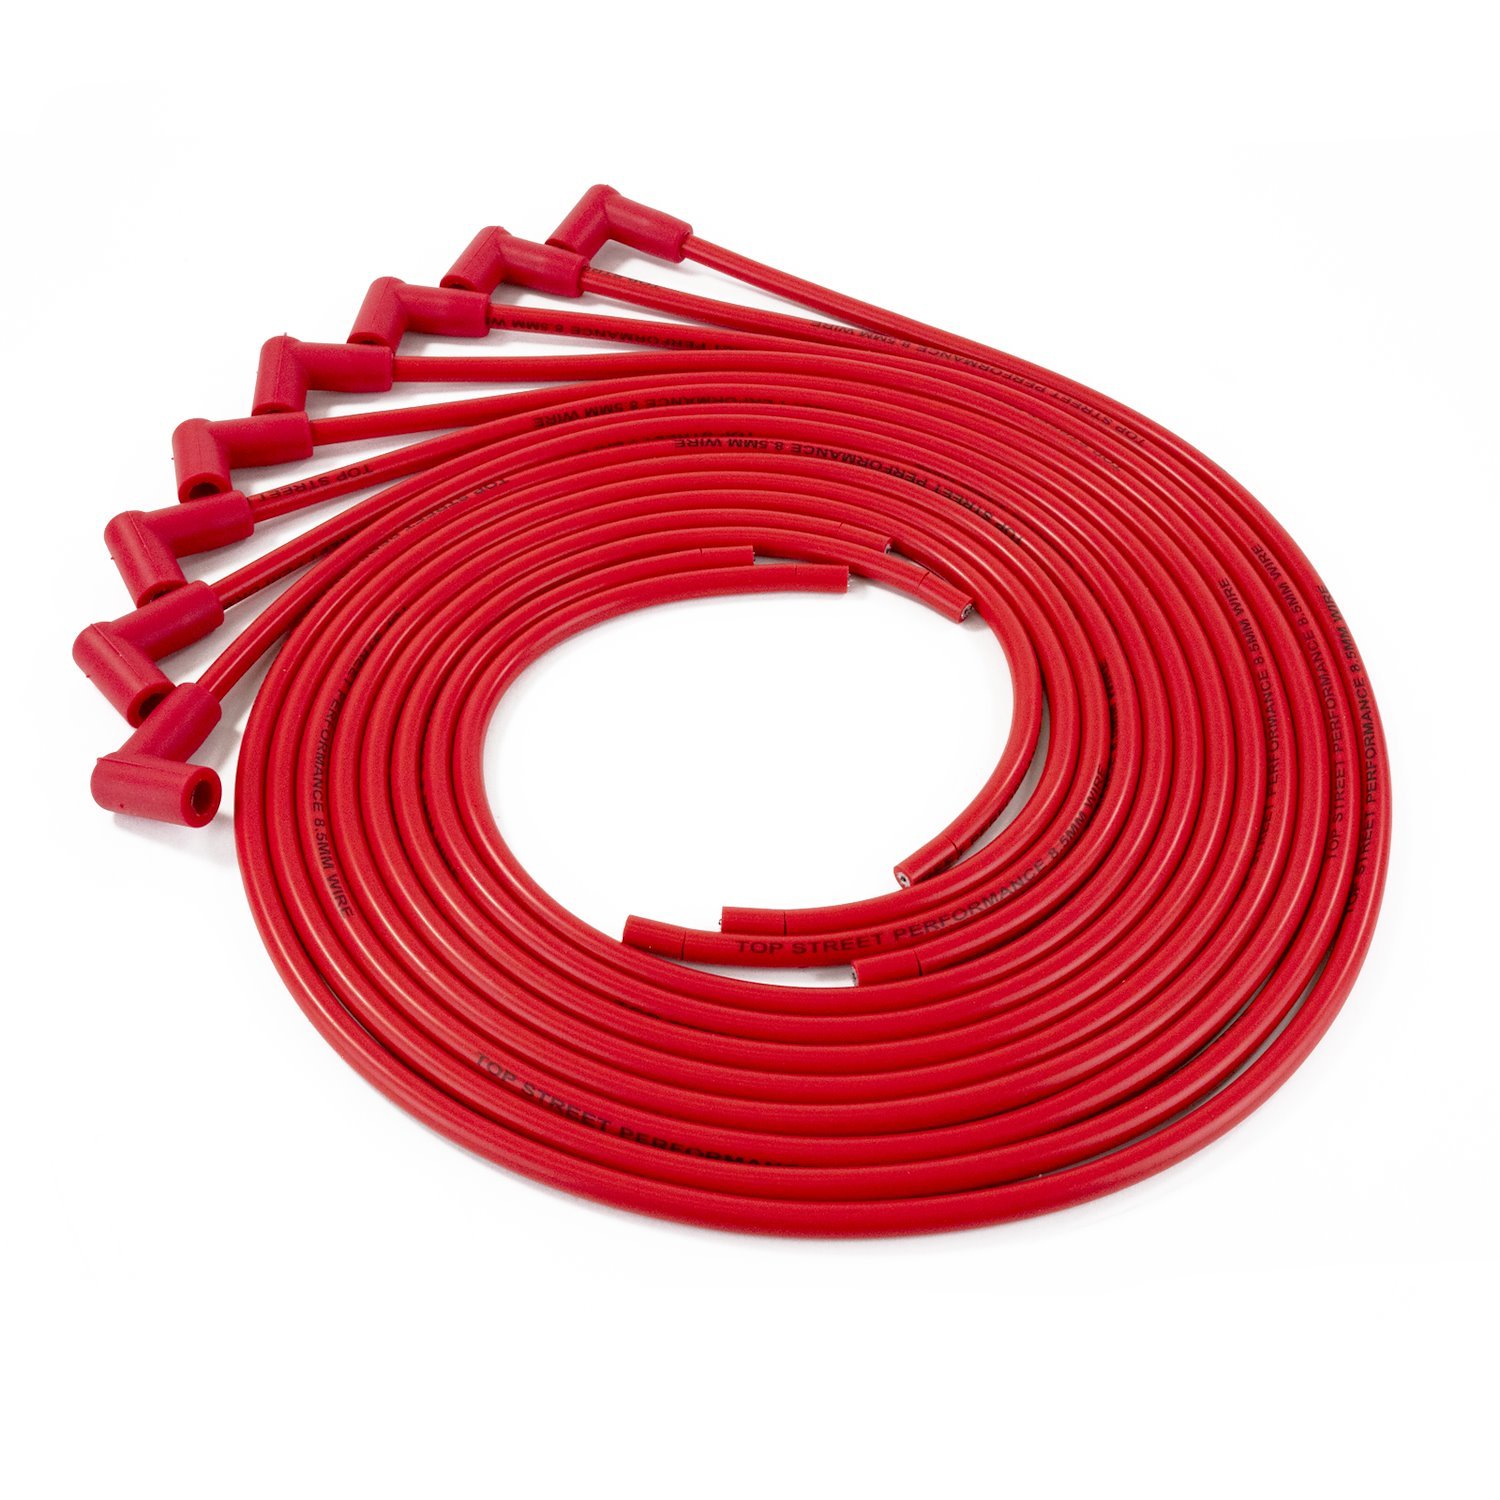 85290 Universal Ignition Wires, 8.5mm Red, 90-Degrees Plug Boots